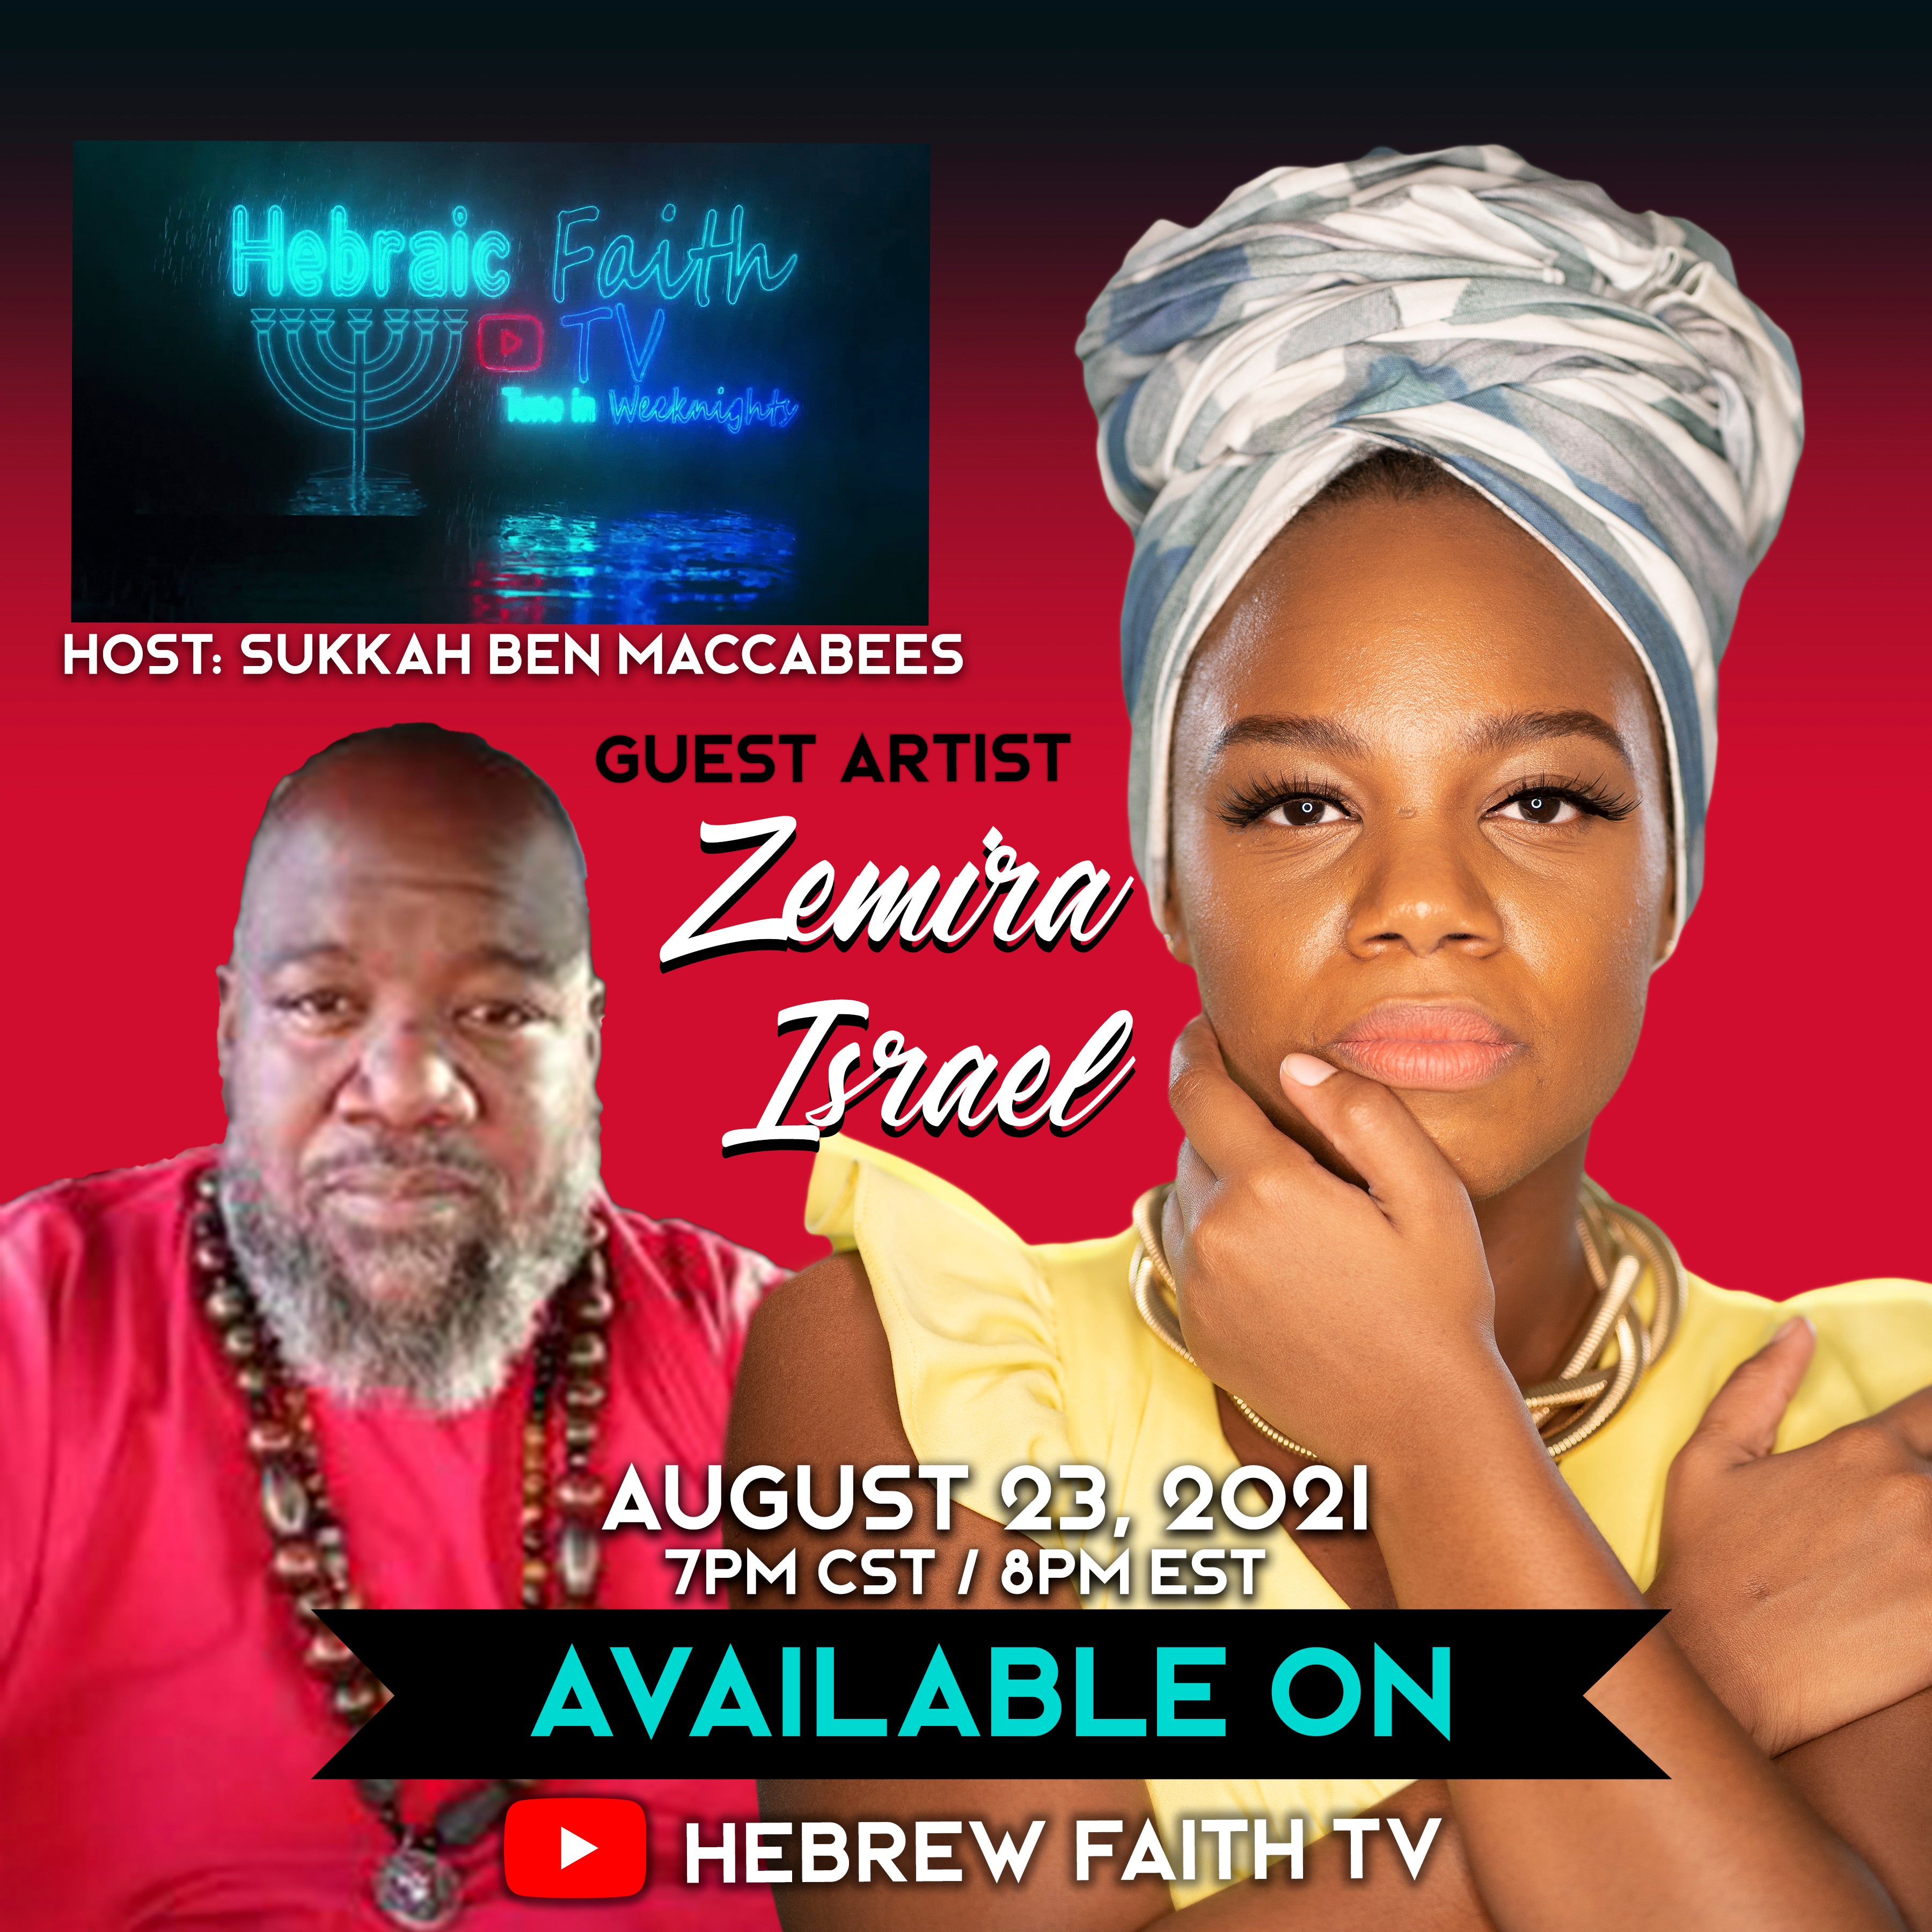 ZEMIRA ISRAEL INTERVIEW WITH HEBREW FAITH TV WITH SUKKAH BEN MACCABEES 